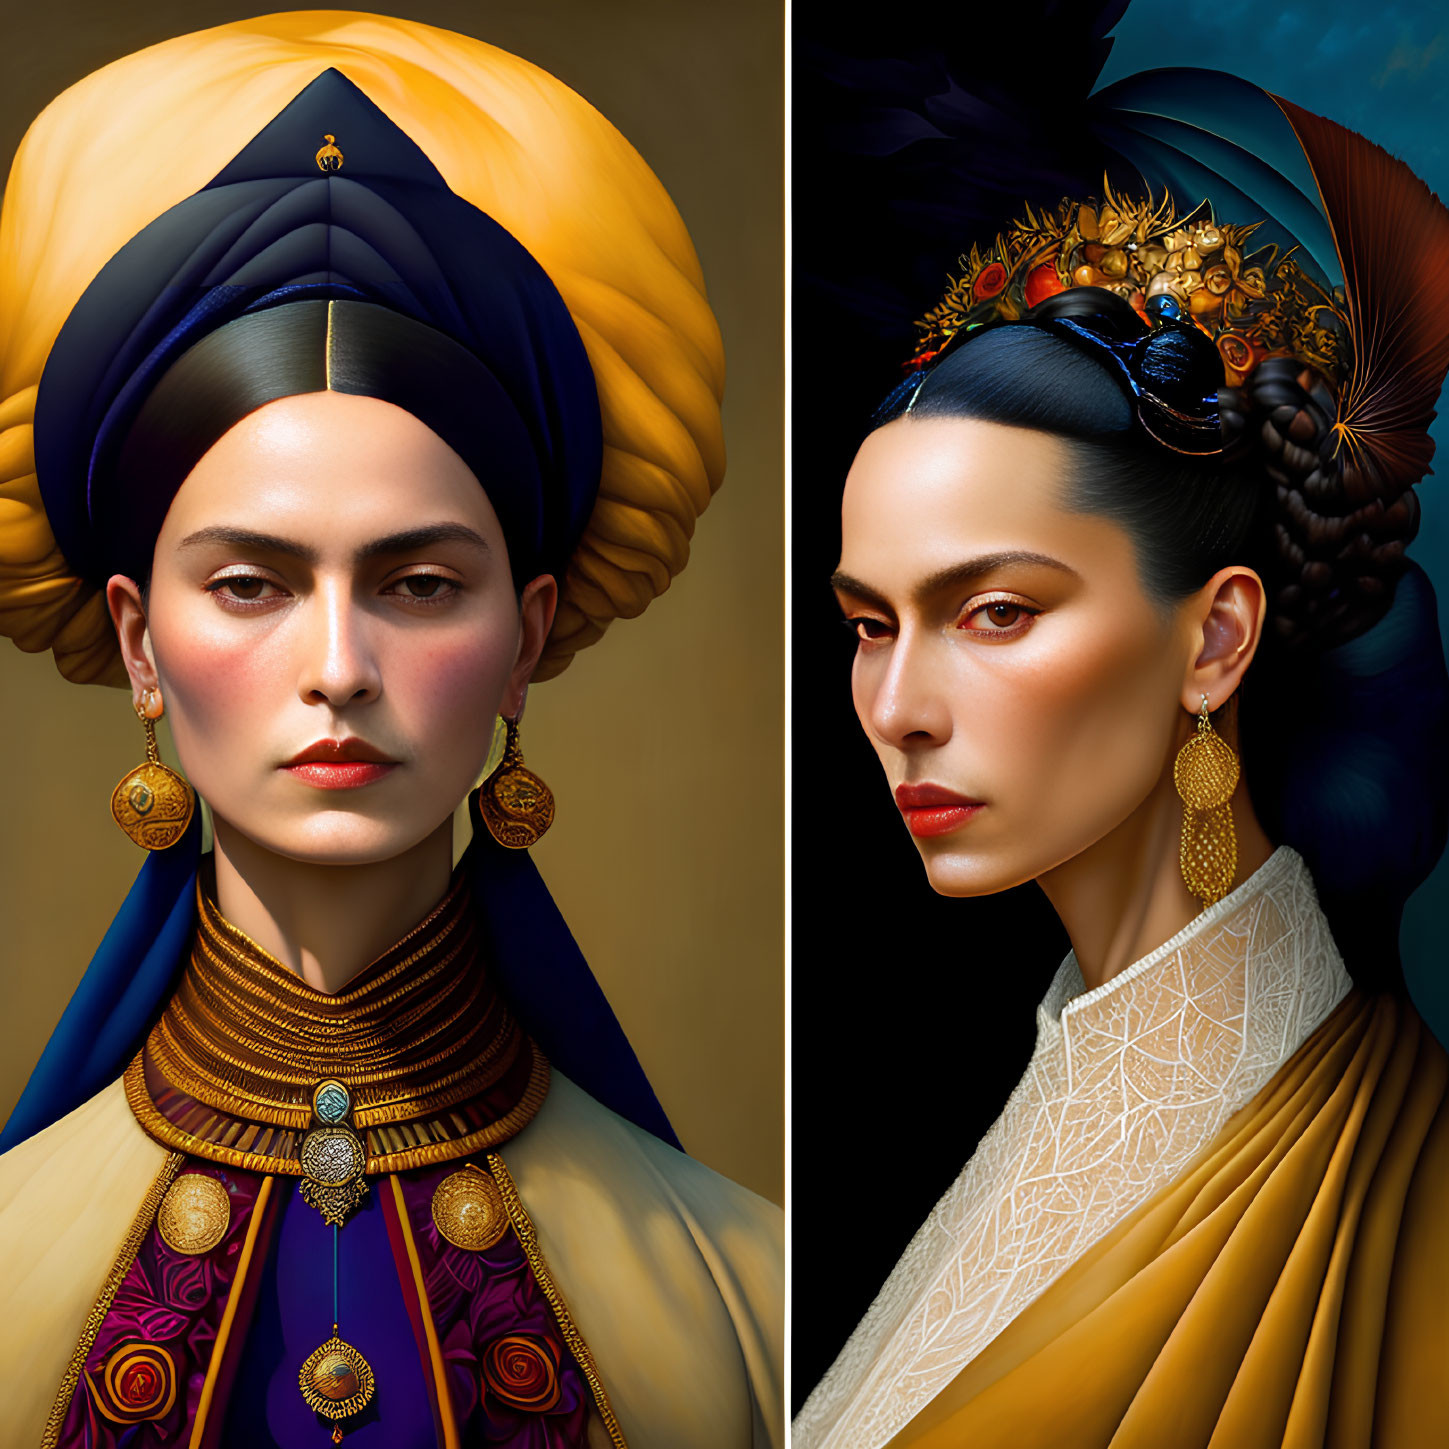 Symmetrical modern portraits of a woman in traditional turban and ornate jewelry